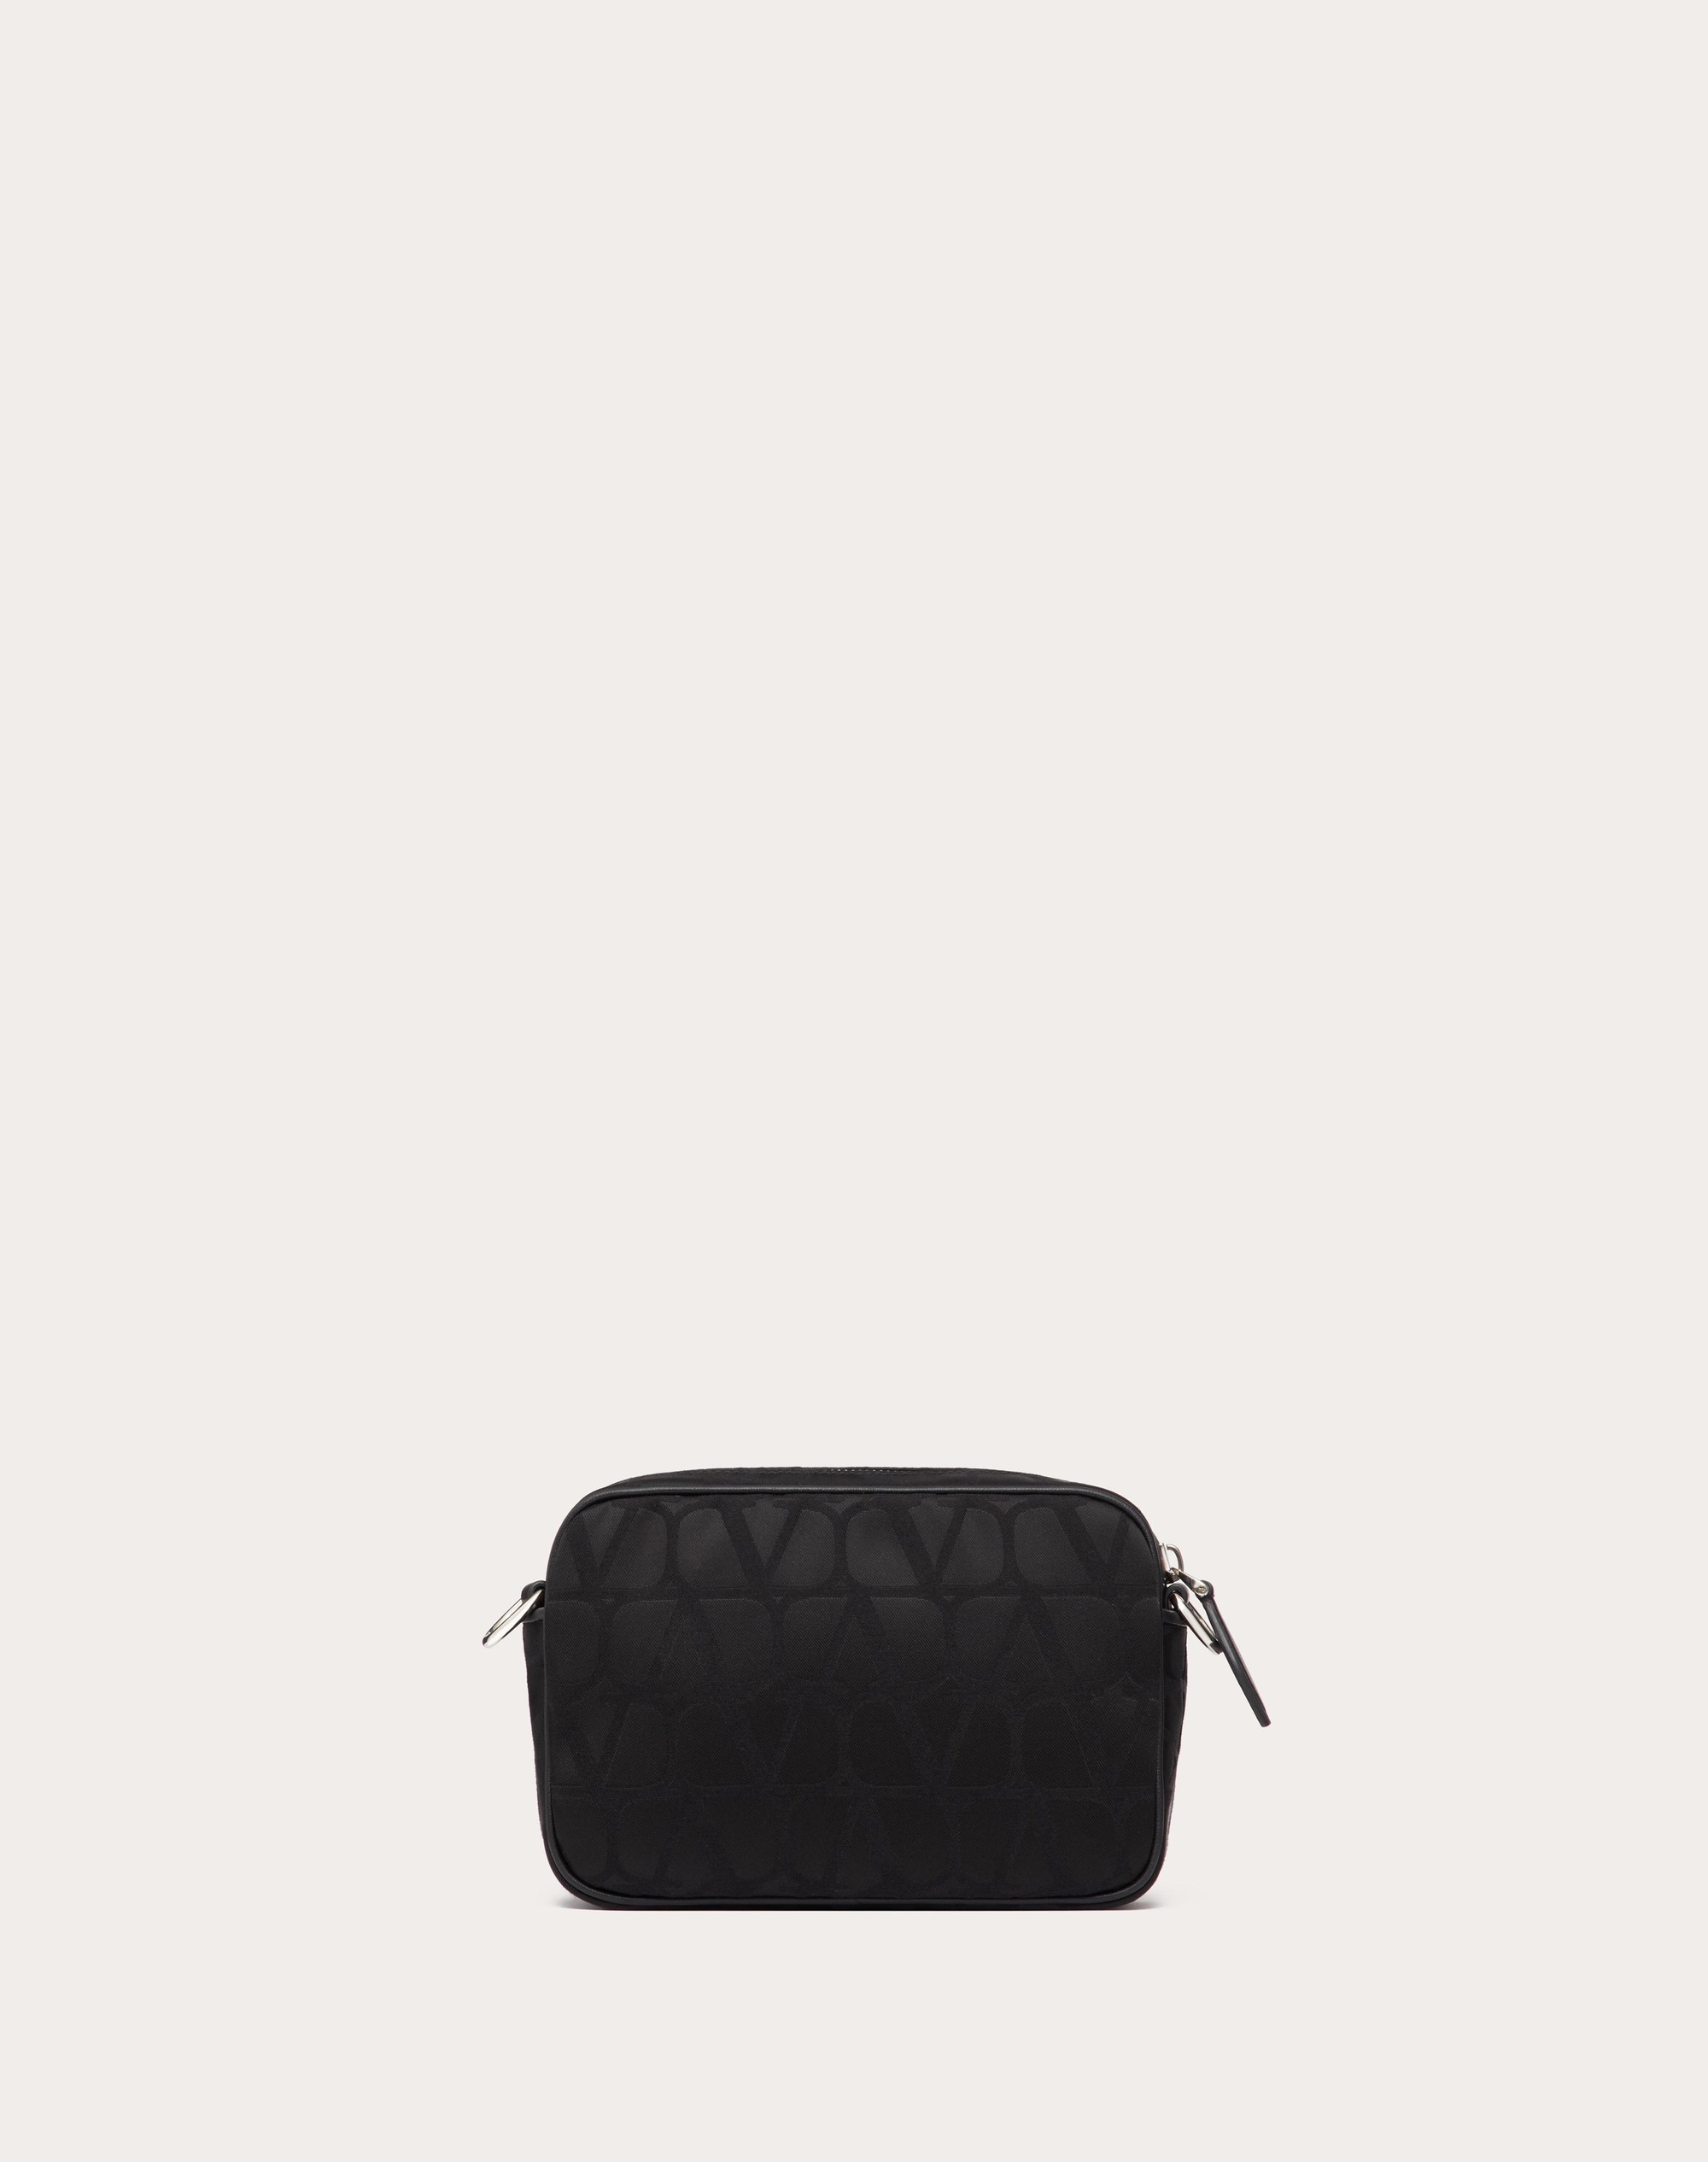 TOILE ICONOGRAPHE SHOULDER BAG IN TECHNICAL FABRIC WITH LEATHER DETAILS - 4